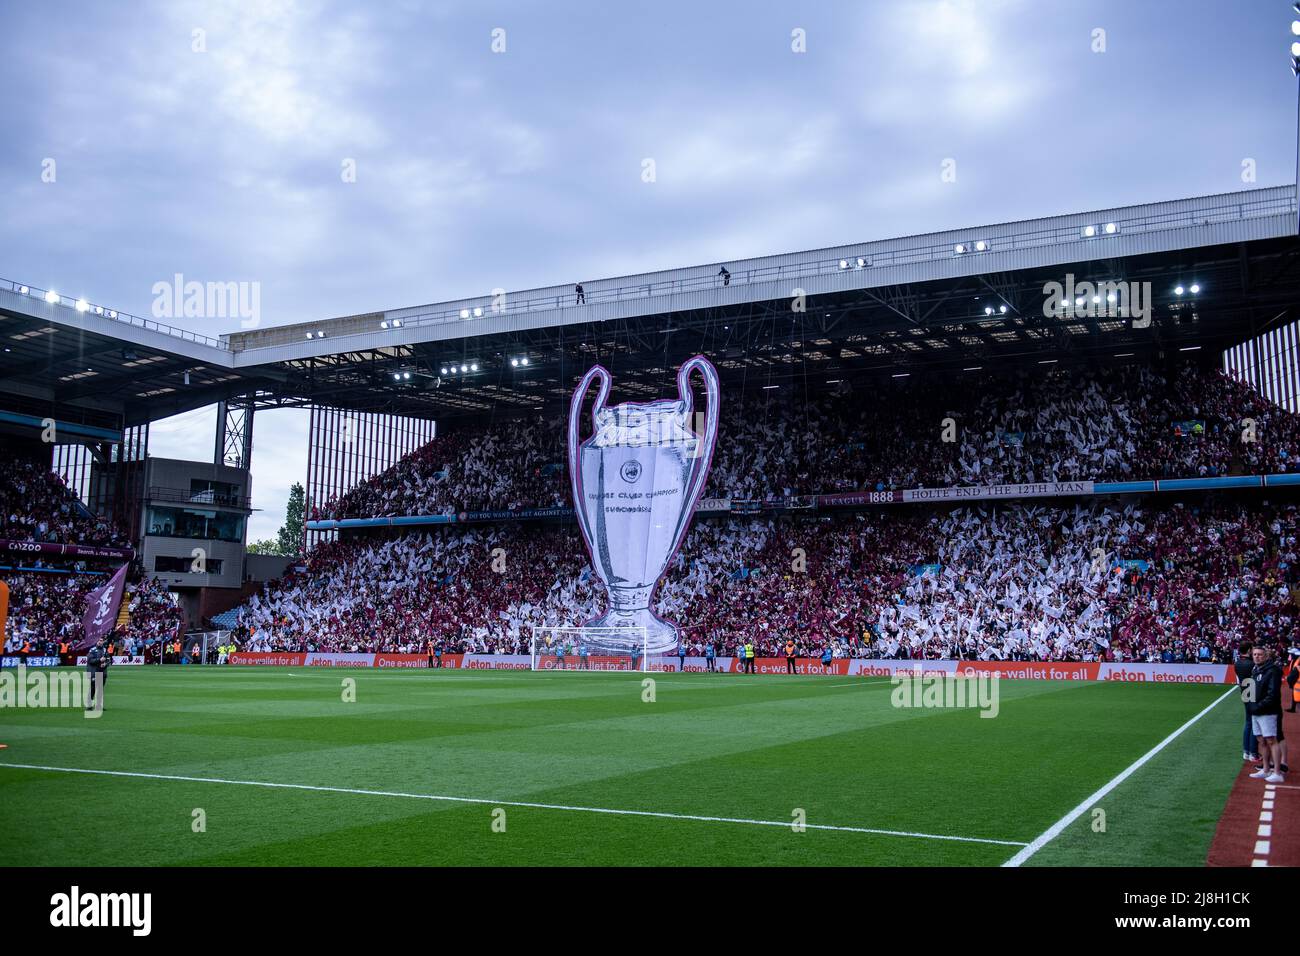 BIRMINGHAM, ENGLAND - MAY 15: A general view of the stadium and fans display to celebrate the 40th anniversary of Aston Villa winning the European cup Stock Photo